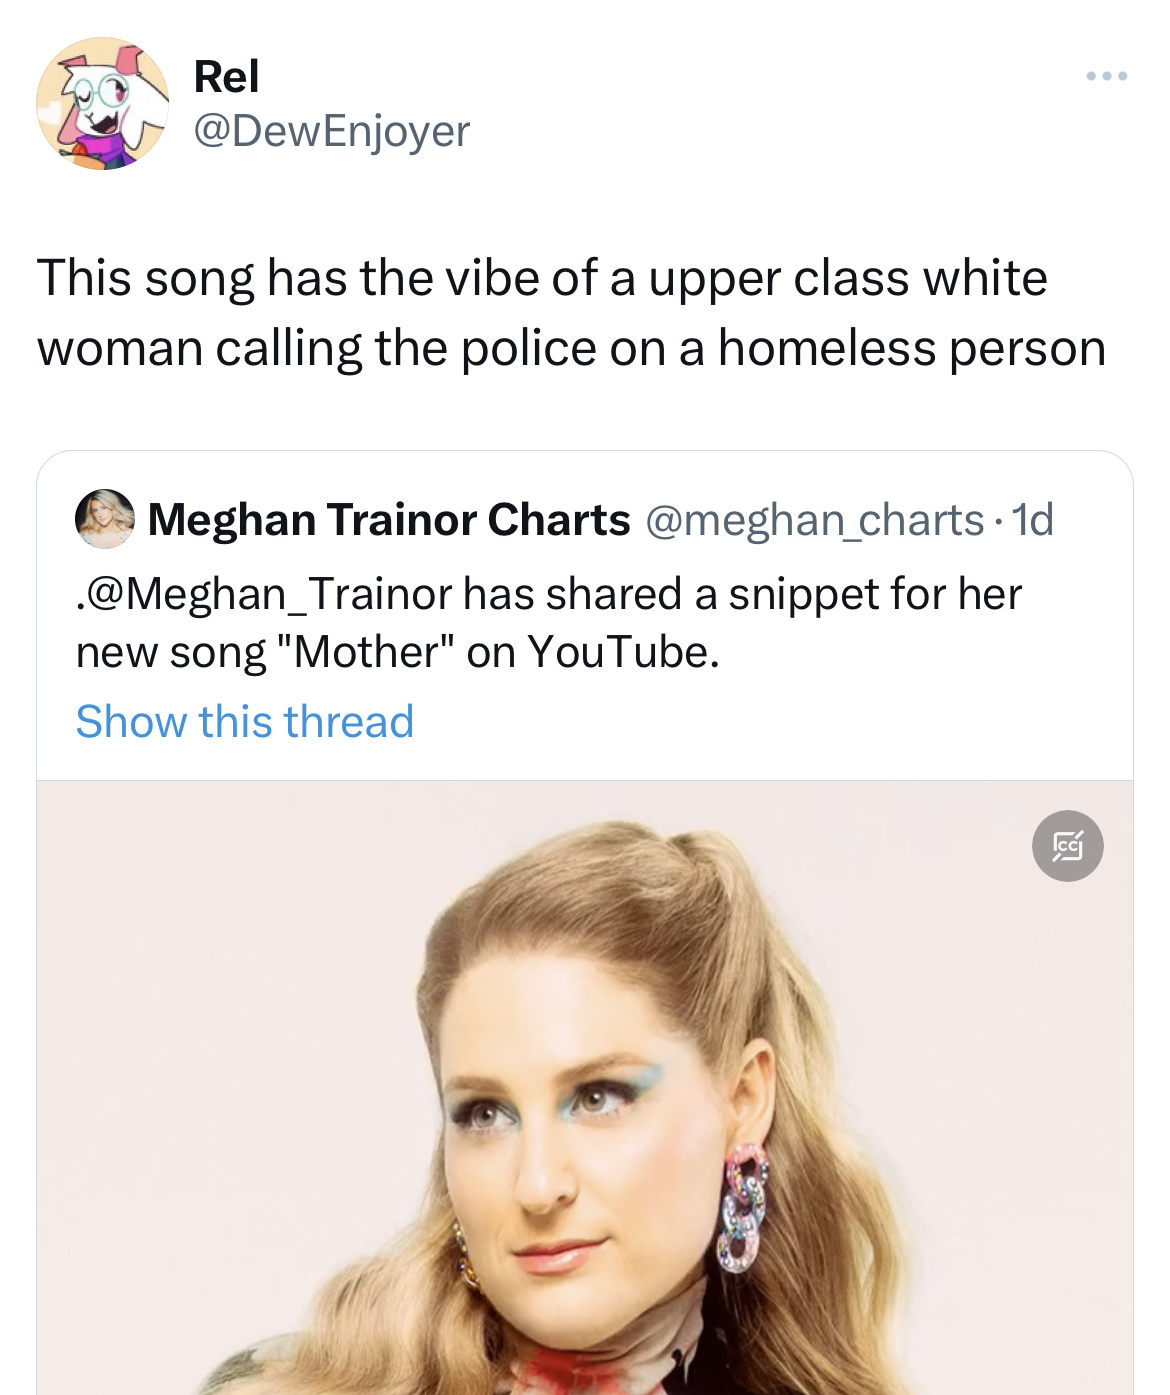 savage tweets - meghan trainor hot - Rel This song has the vibe of a upper class white woman calling the police on a homeless person Meghan Trainor Charts . 1d . Trainor has d a snippet for her new song "Mother" on YouTube. Show this thread www E